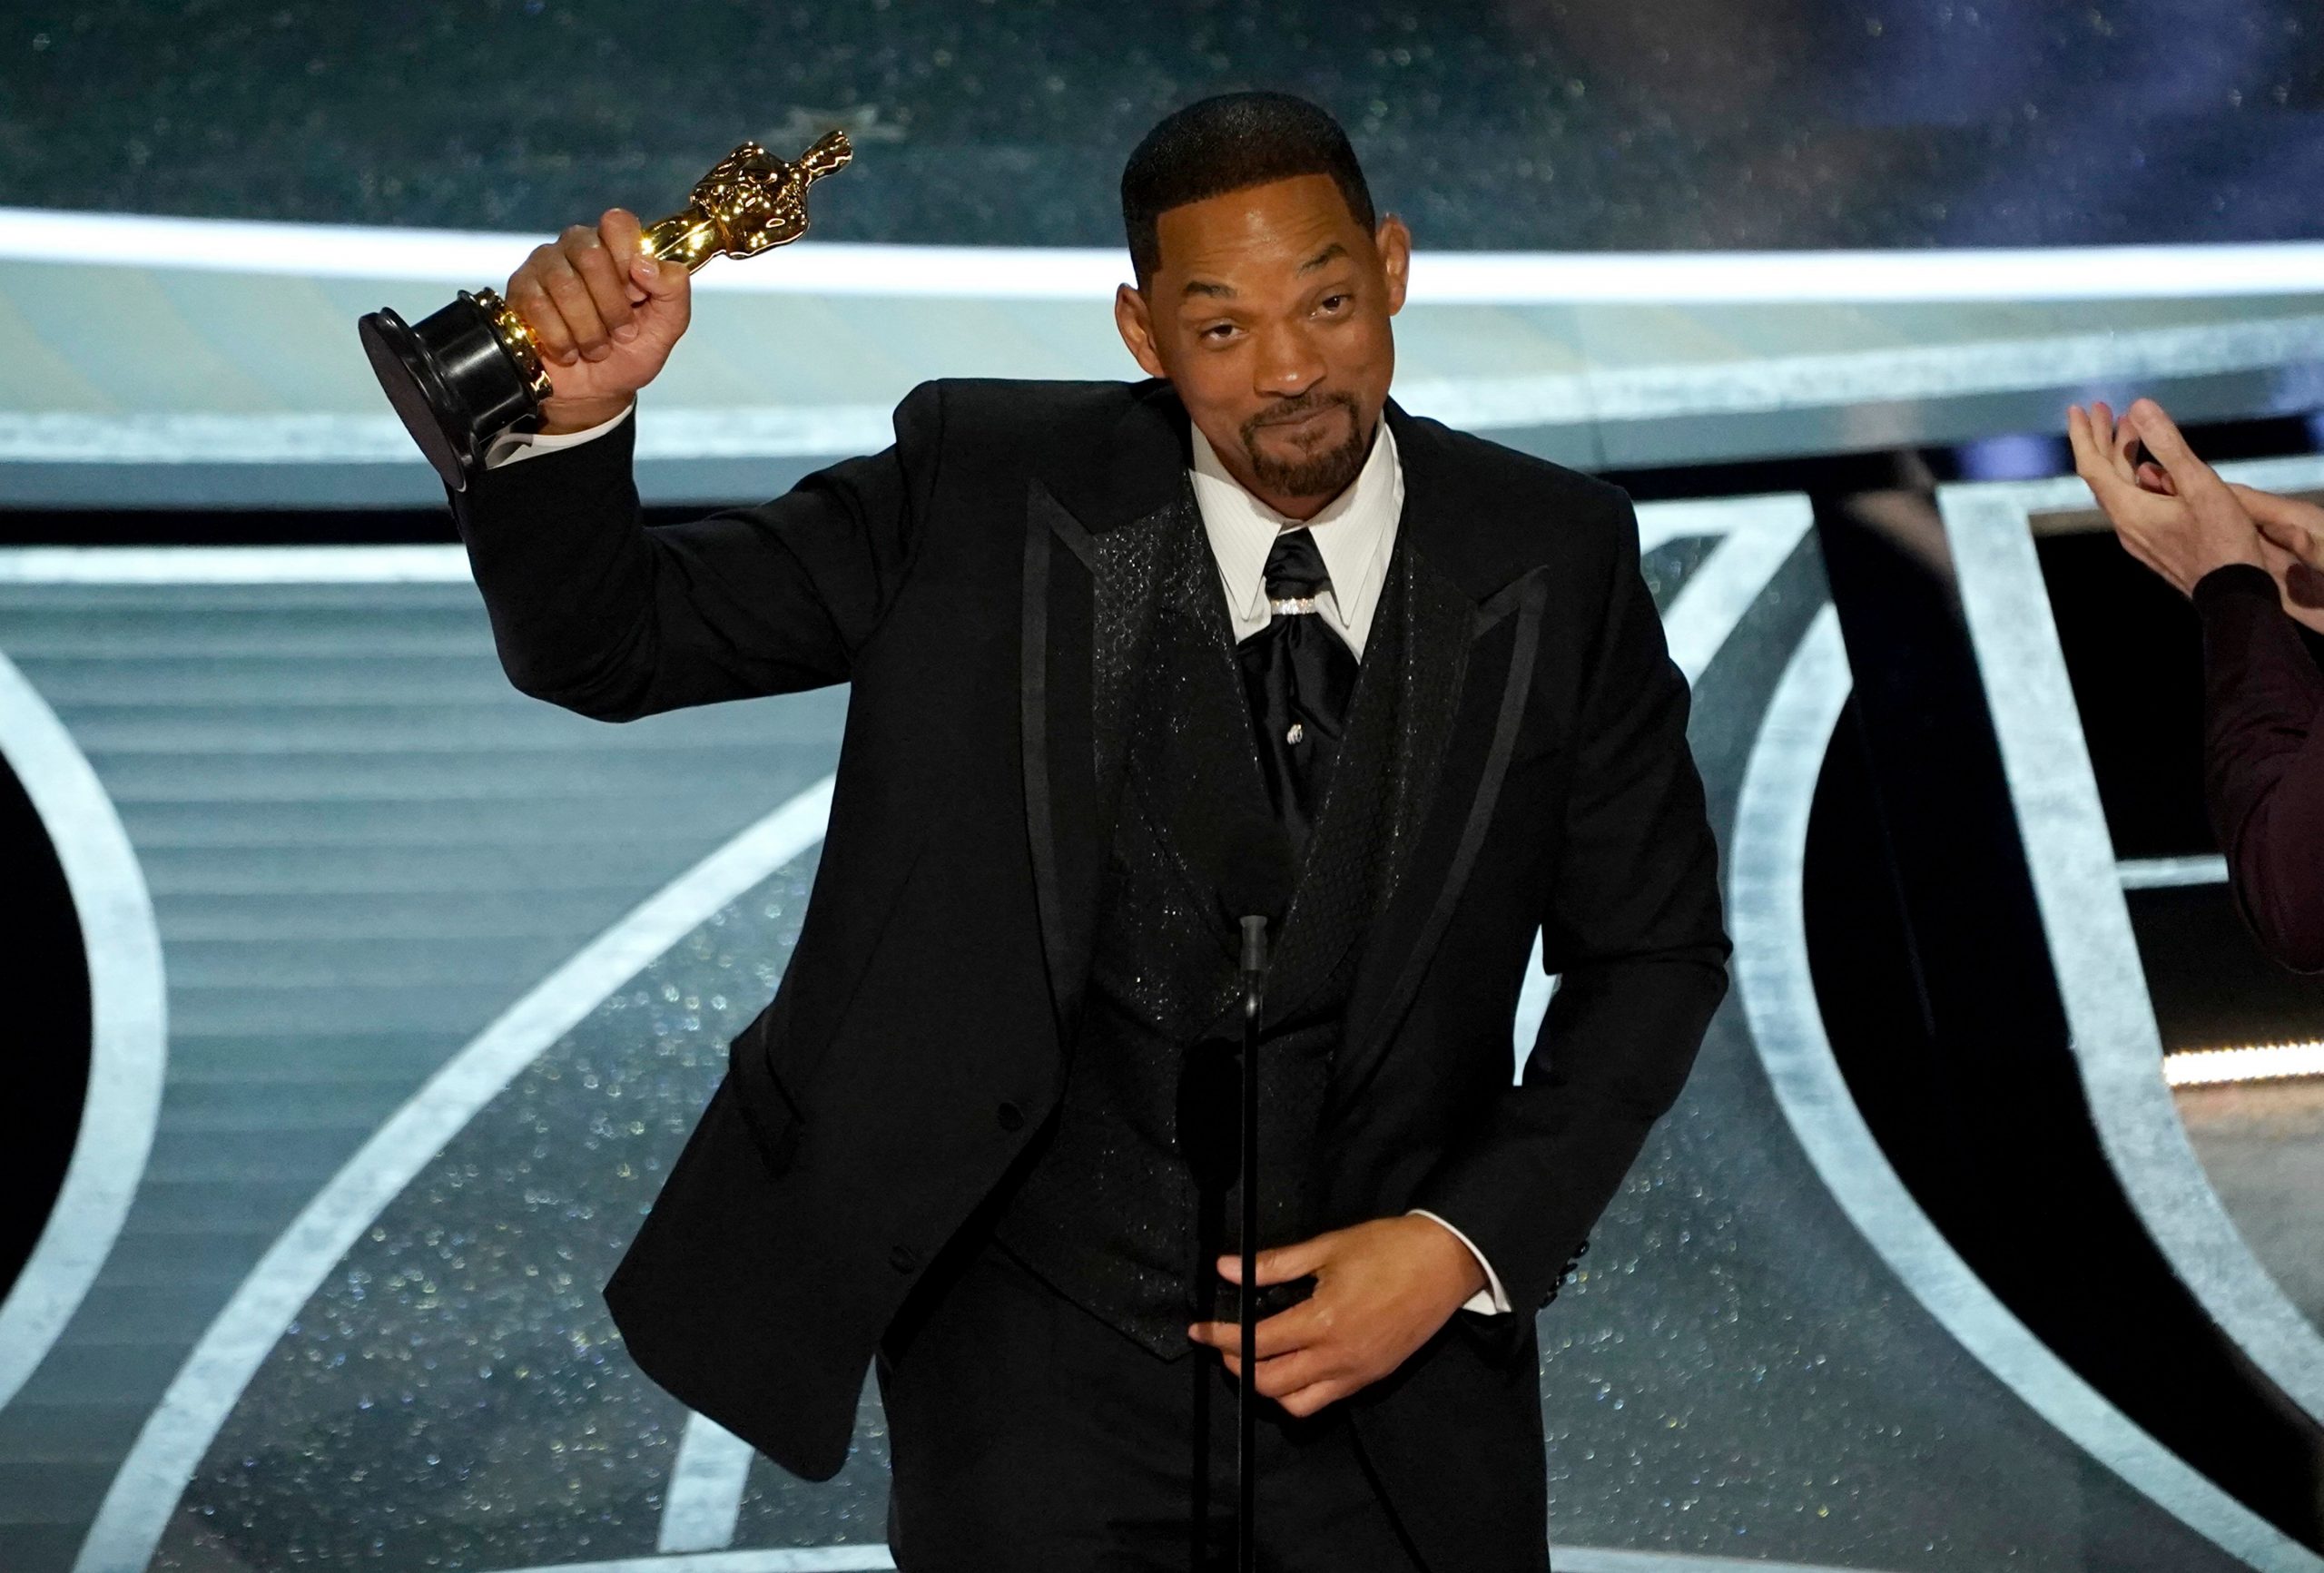 Police offered to arrest Will Smith: Oscars producer